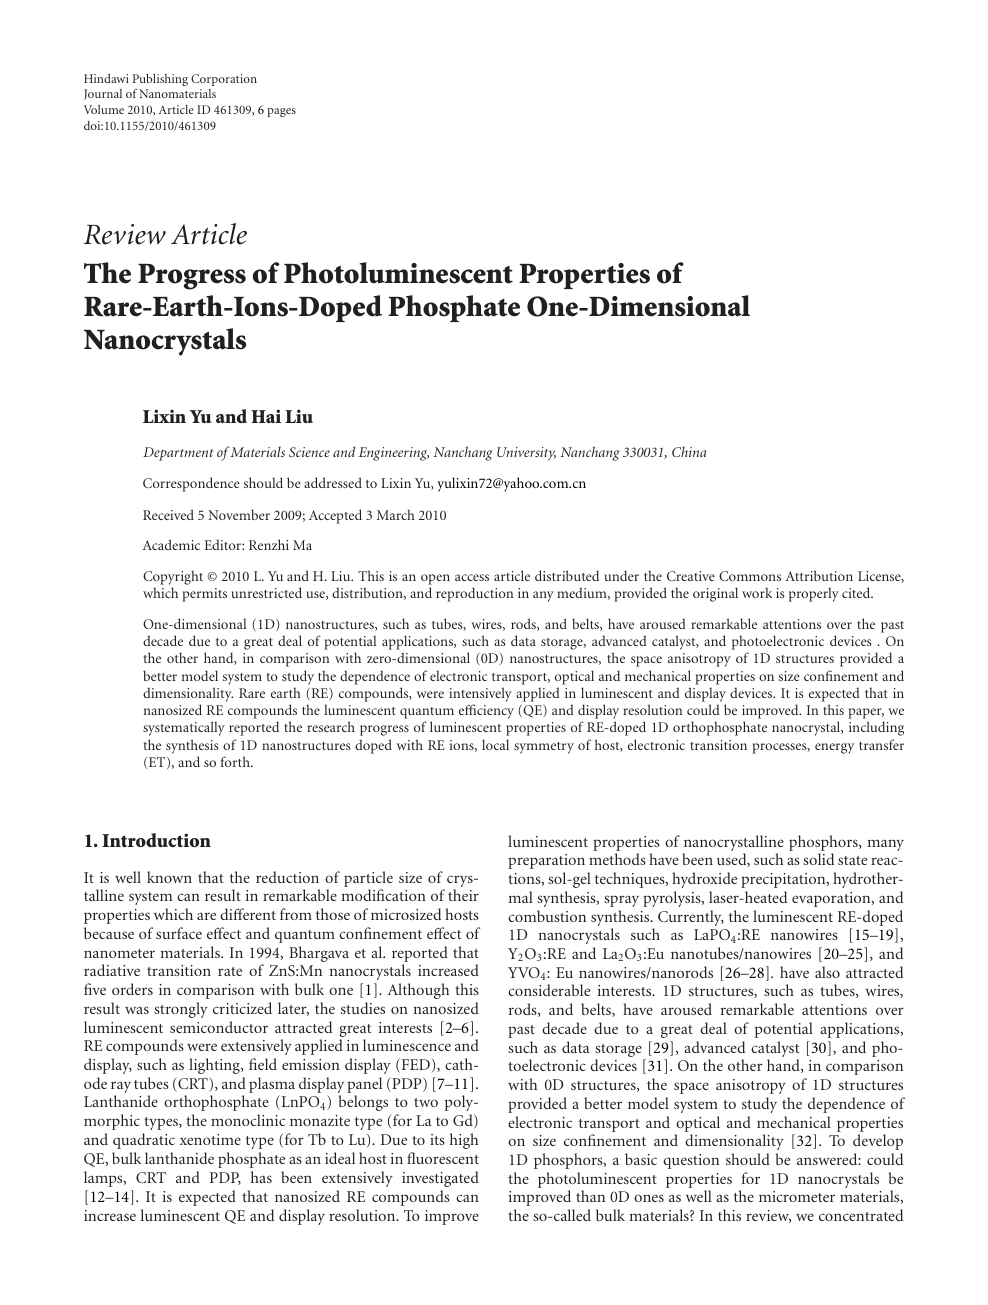 The Progress Of Photoluminescent Properties Of Rare Earth Ions Doped Phosphate One Dimensional Nanocrystals Topic Of Research Paper In Nano Technology Download Scholarly Article Pdf And Read For Free On Cyberleninka Open Science Hub